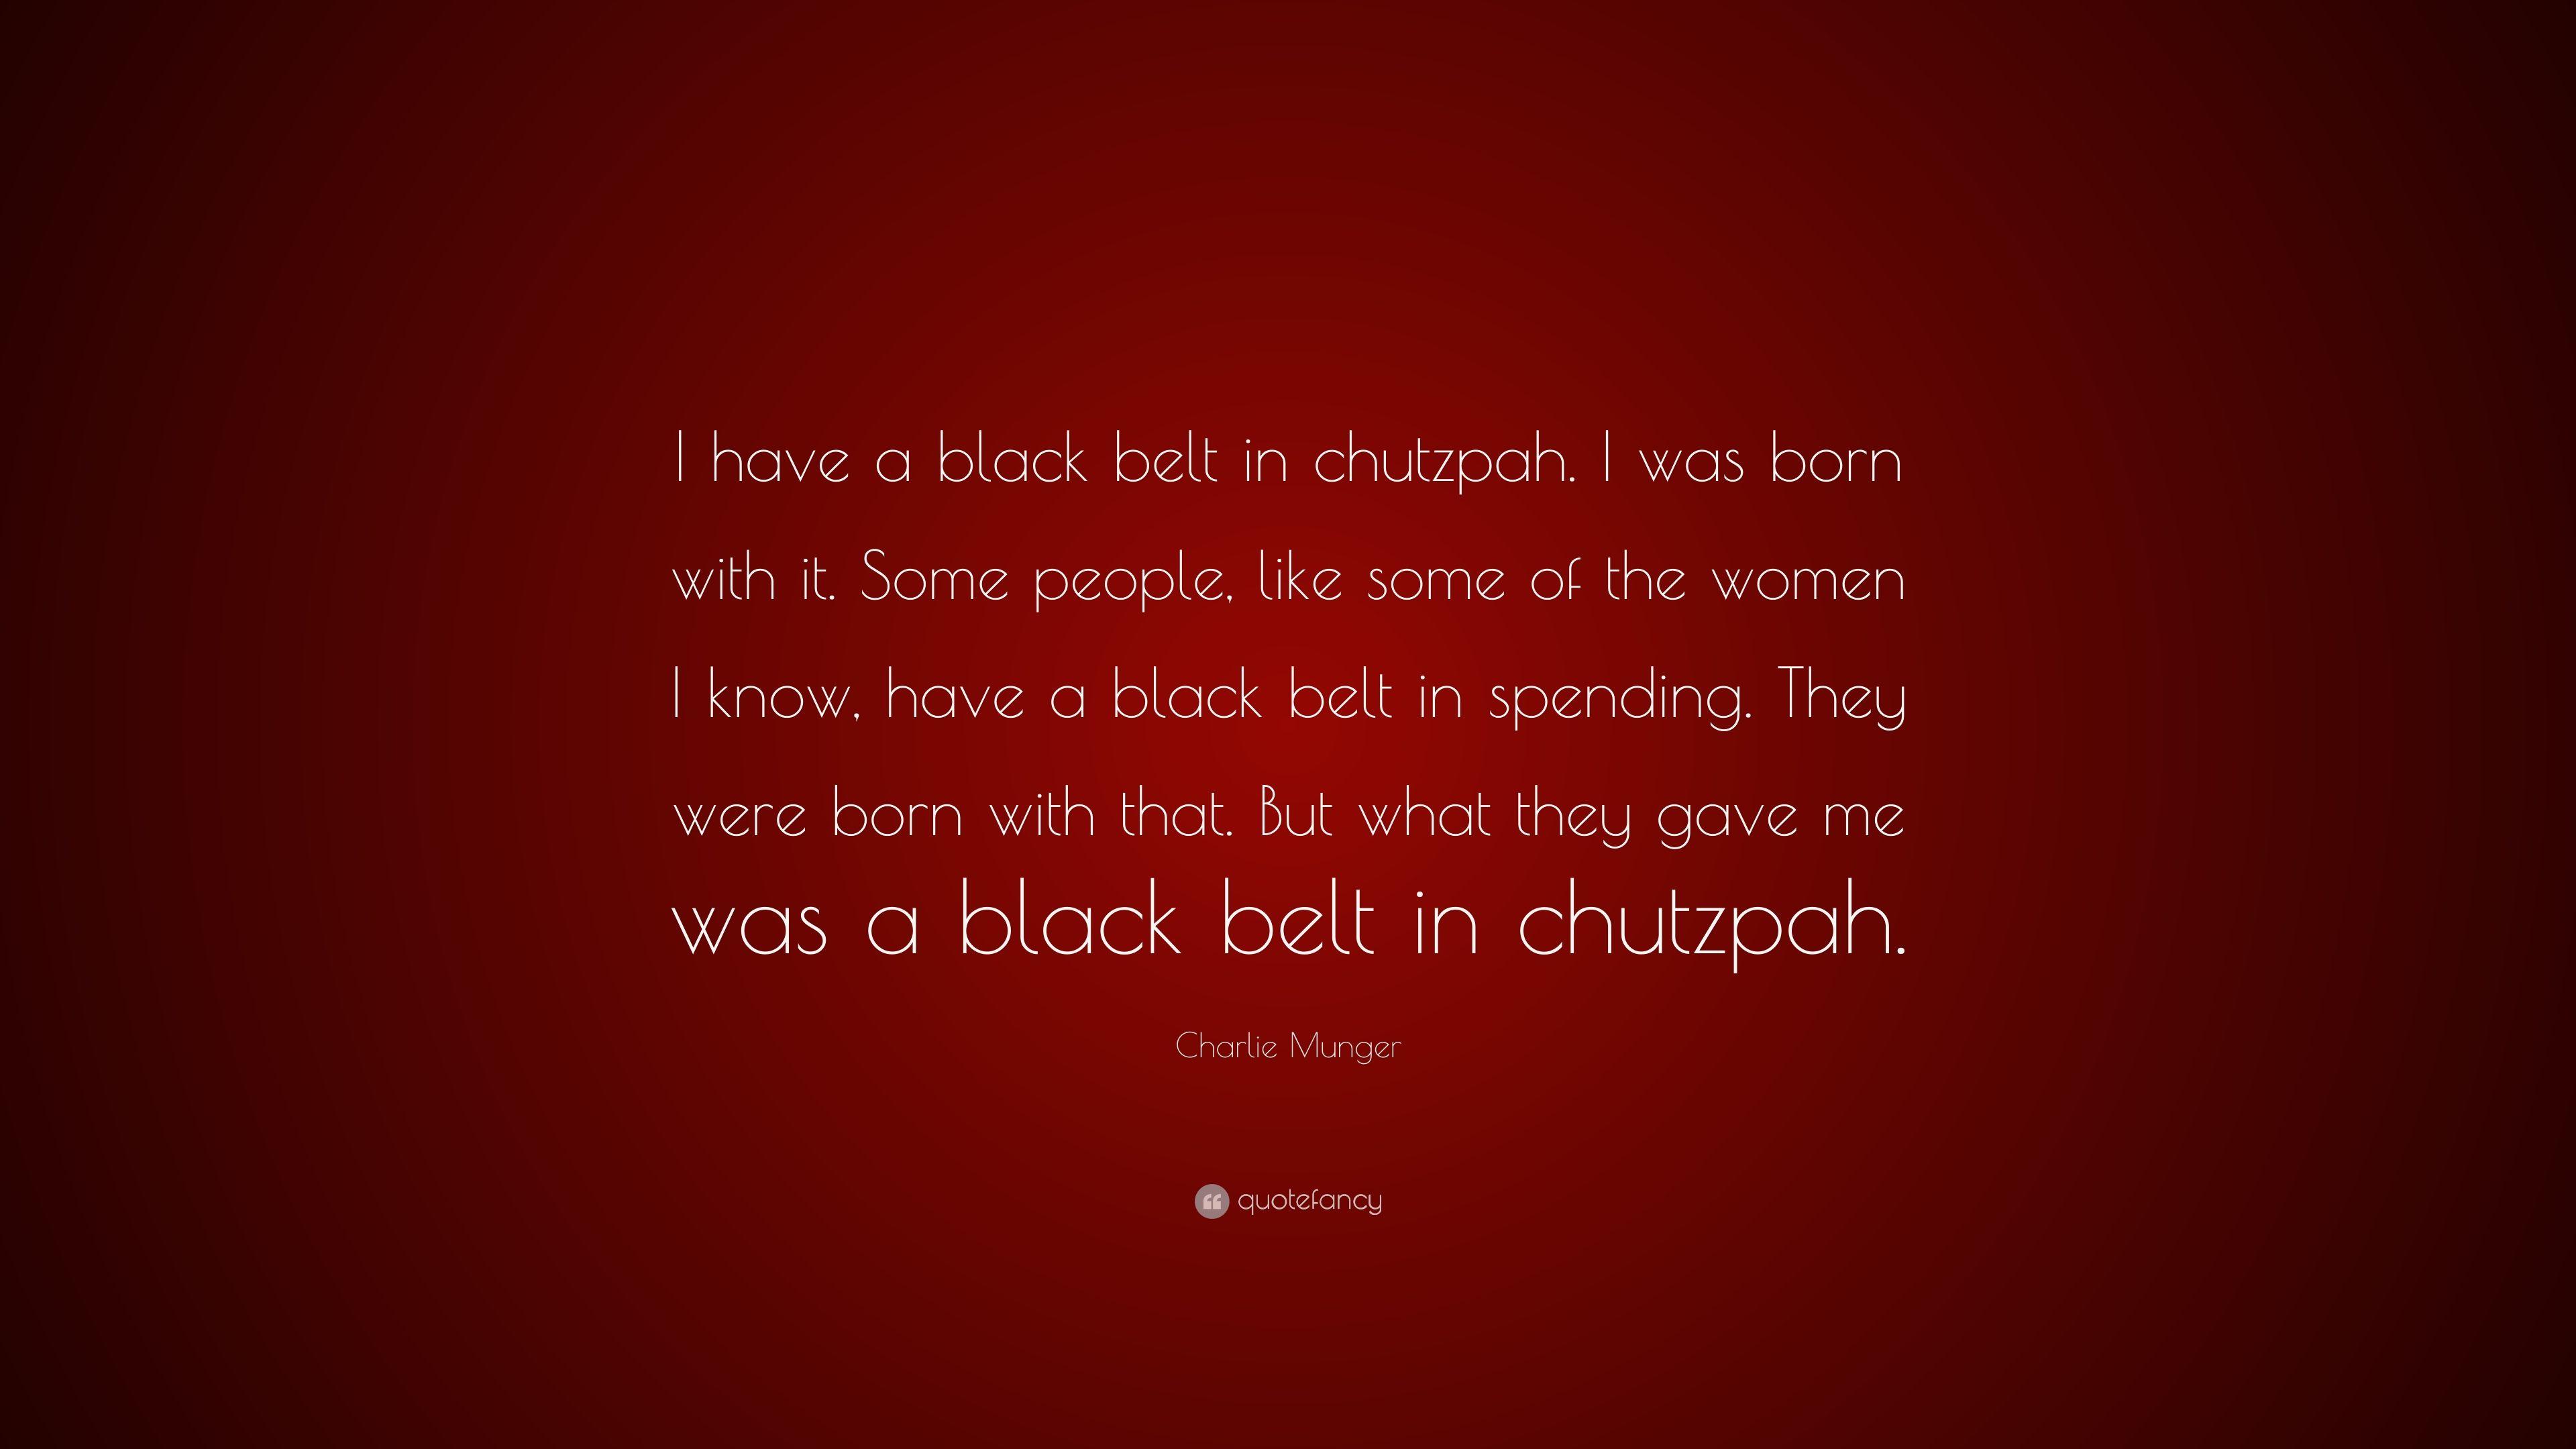 Charlie Munger Quote: “I have a black belt in chutzpah. I was born